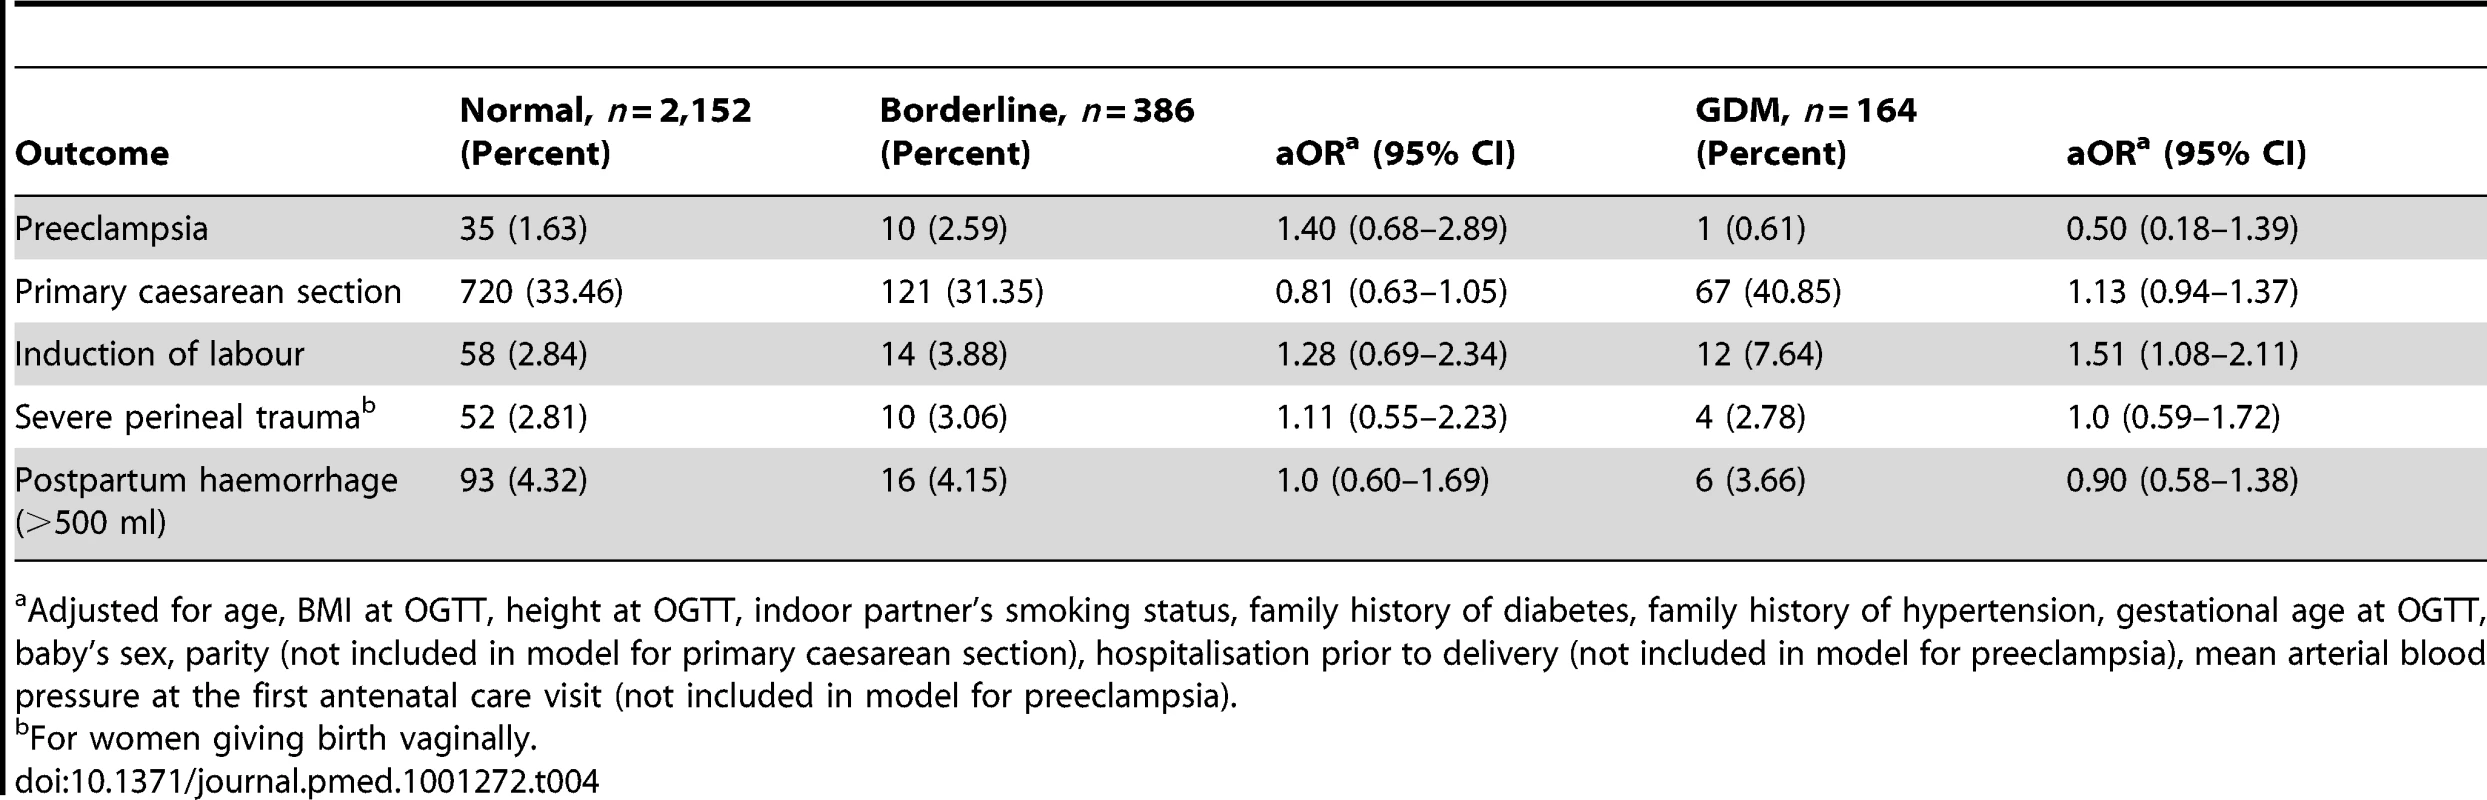 Maternal outcomes comparing normal (referent) group to borderline and GDM groups.